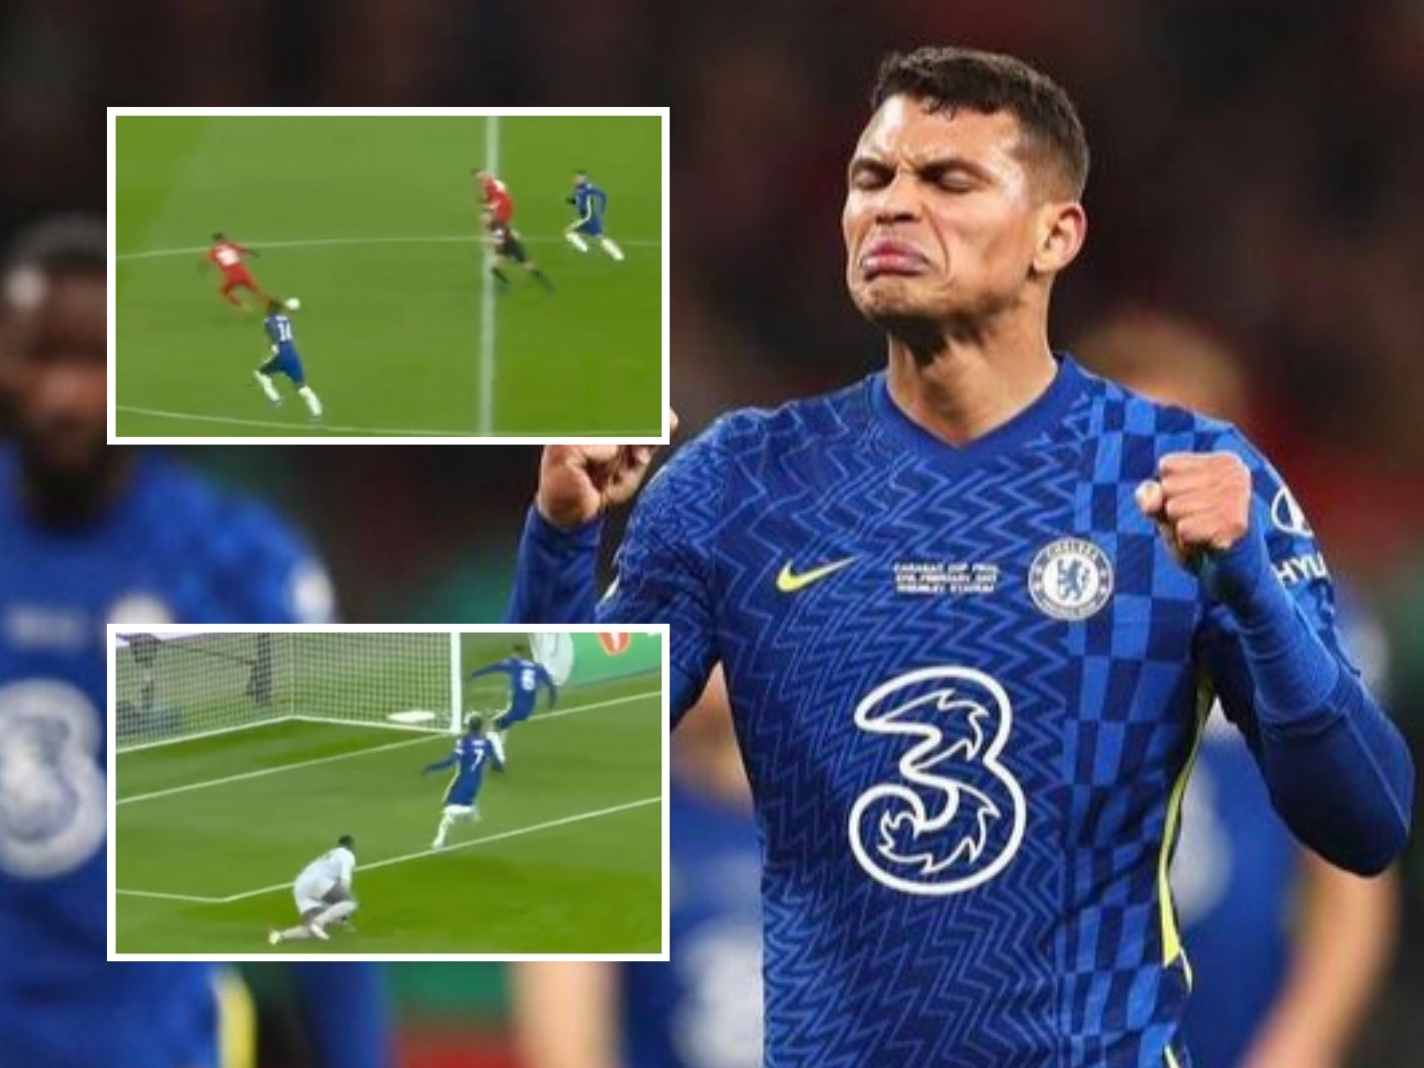 How 37 yo Thiago Silva made from one end to another in seconds to stop a Liverpool.